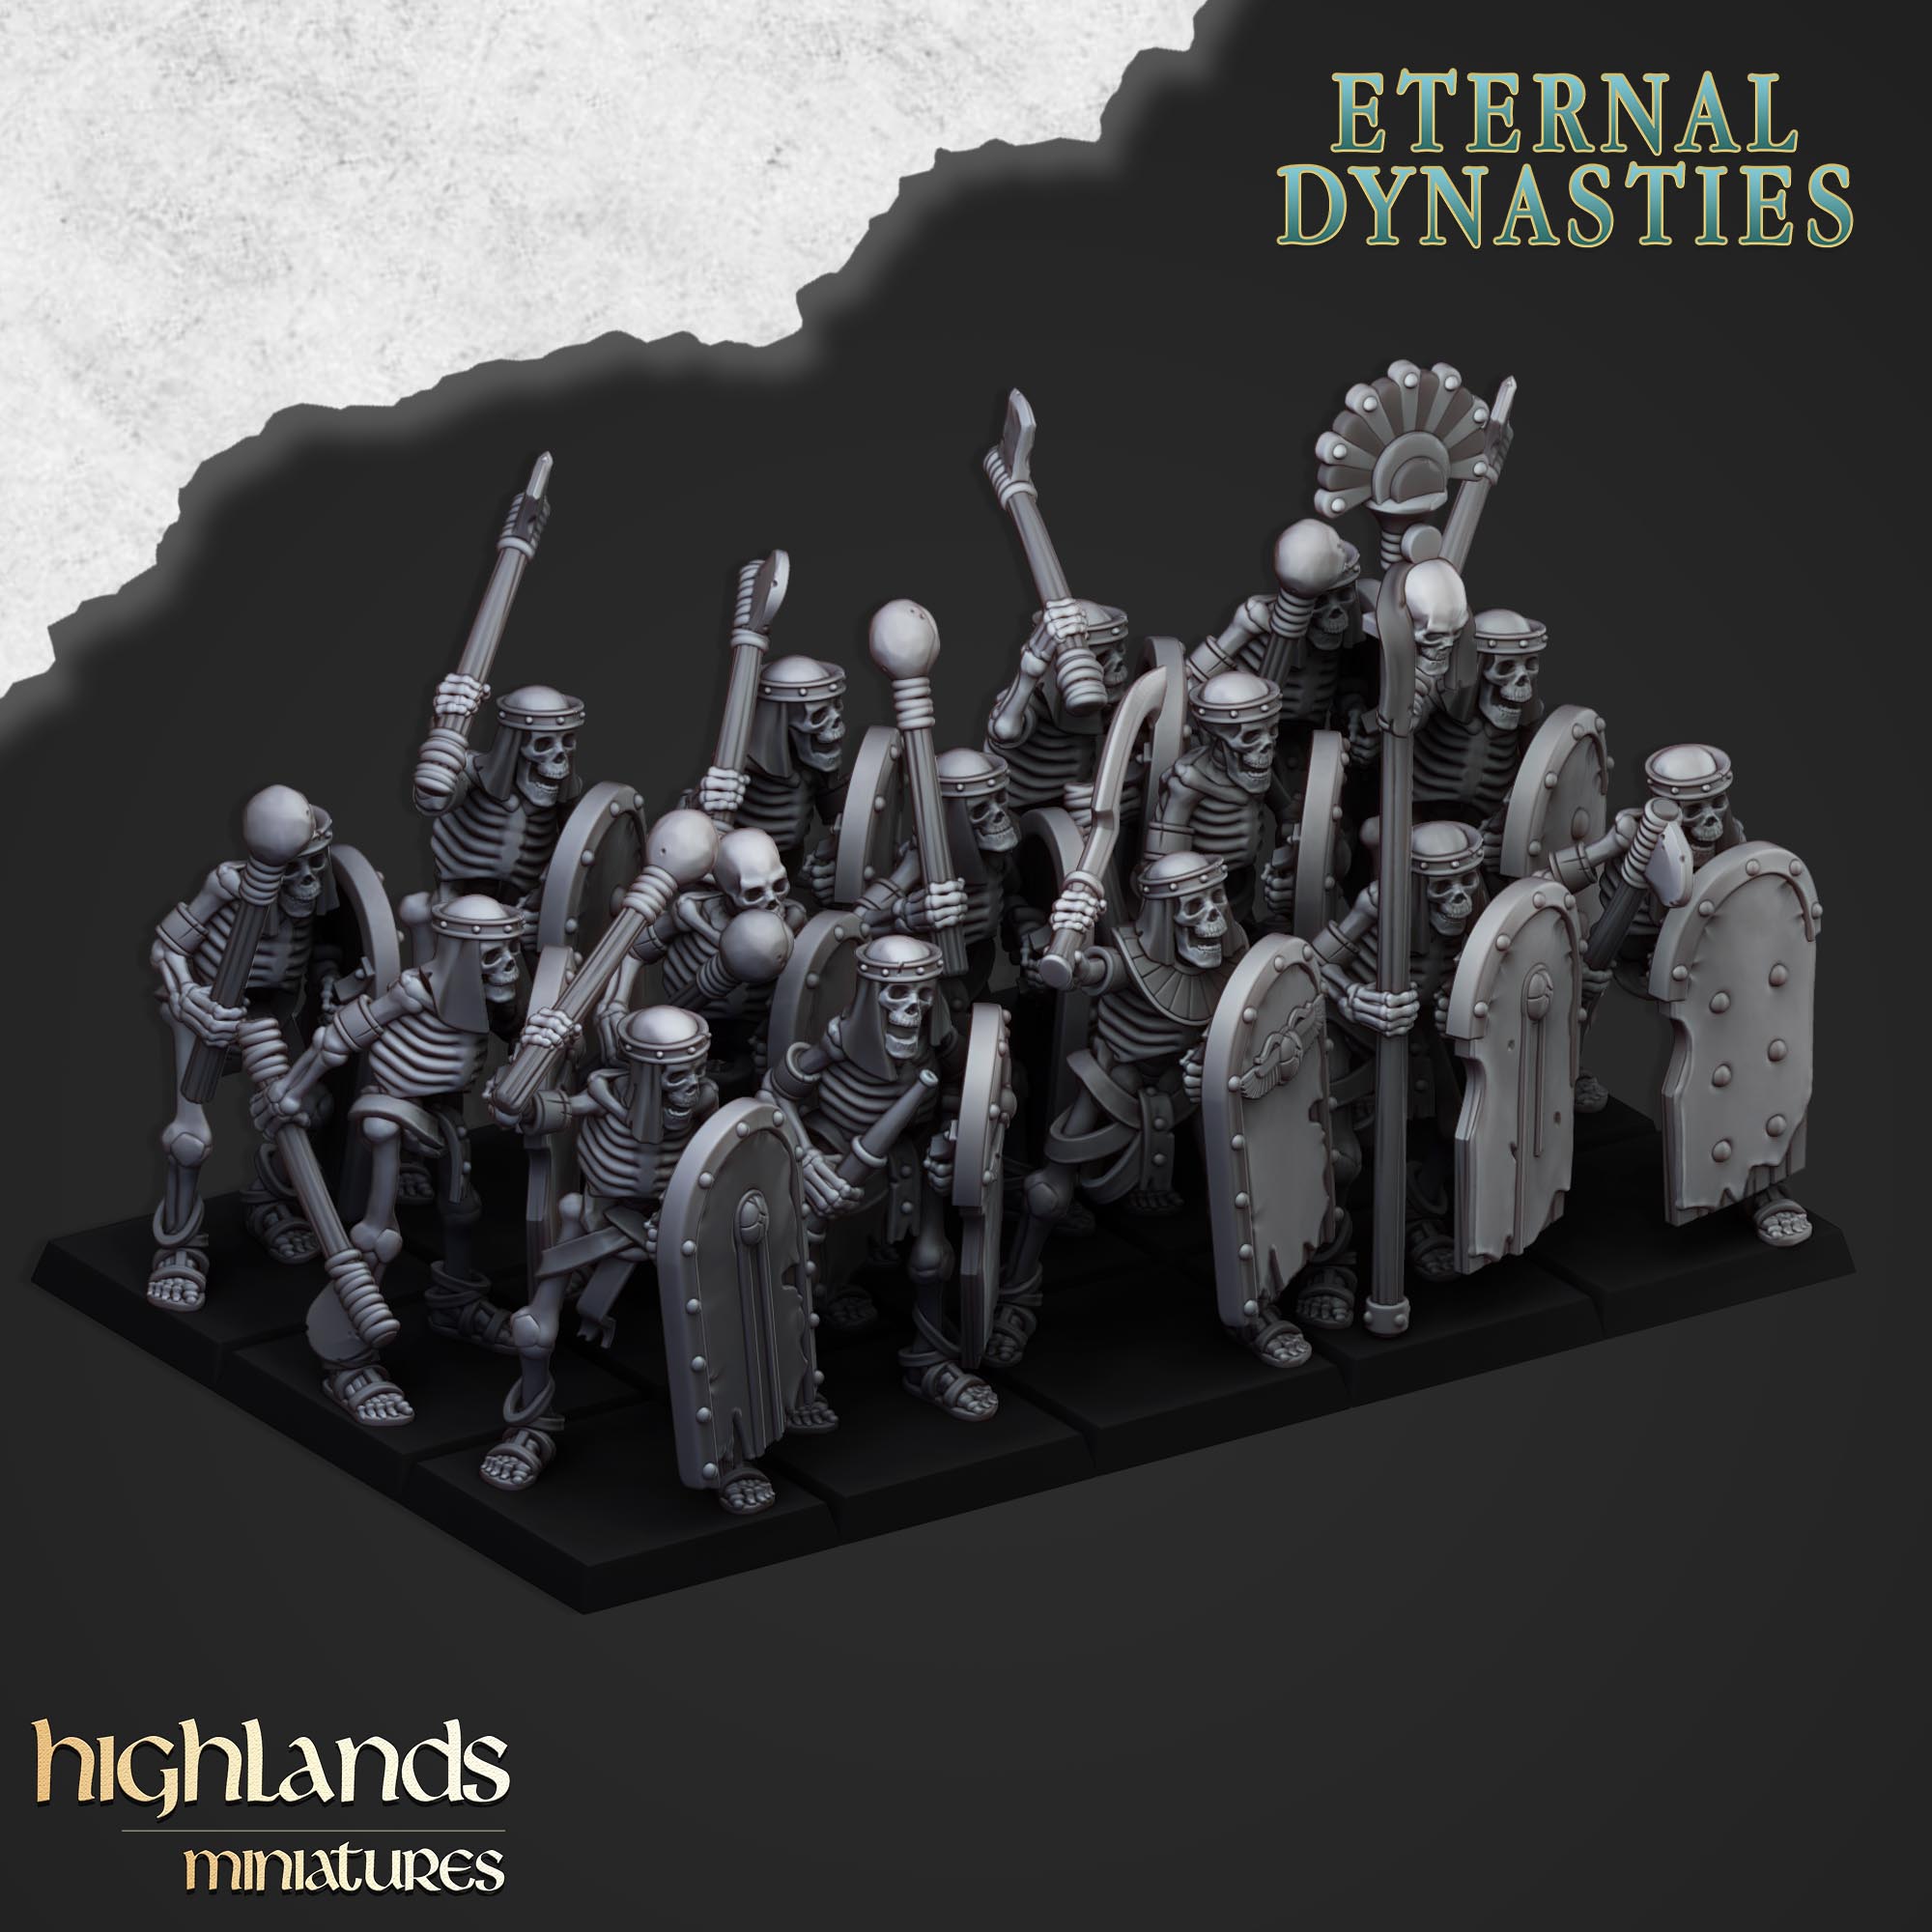 Ancient Skeletons with Hand Weapons - Eternal Dynasties - | Highlands Miniatures